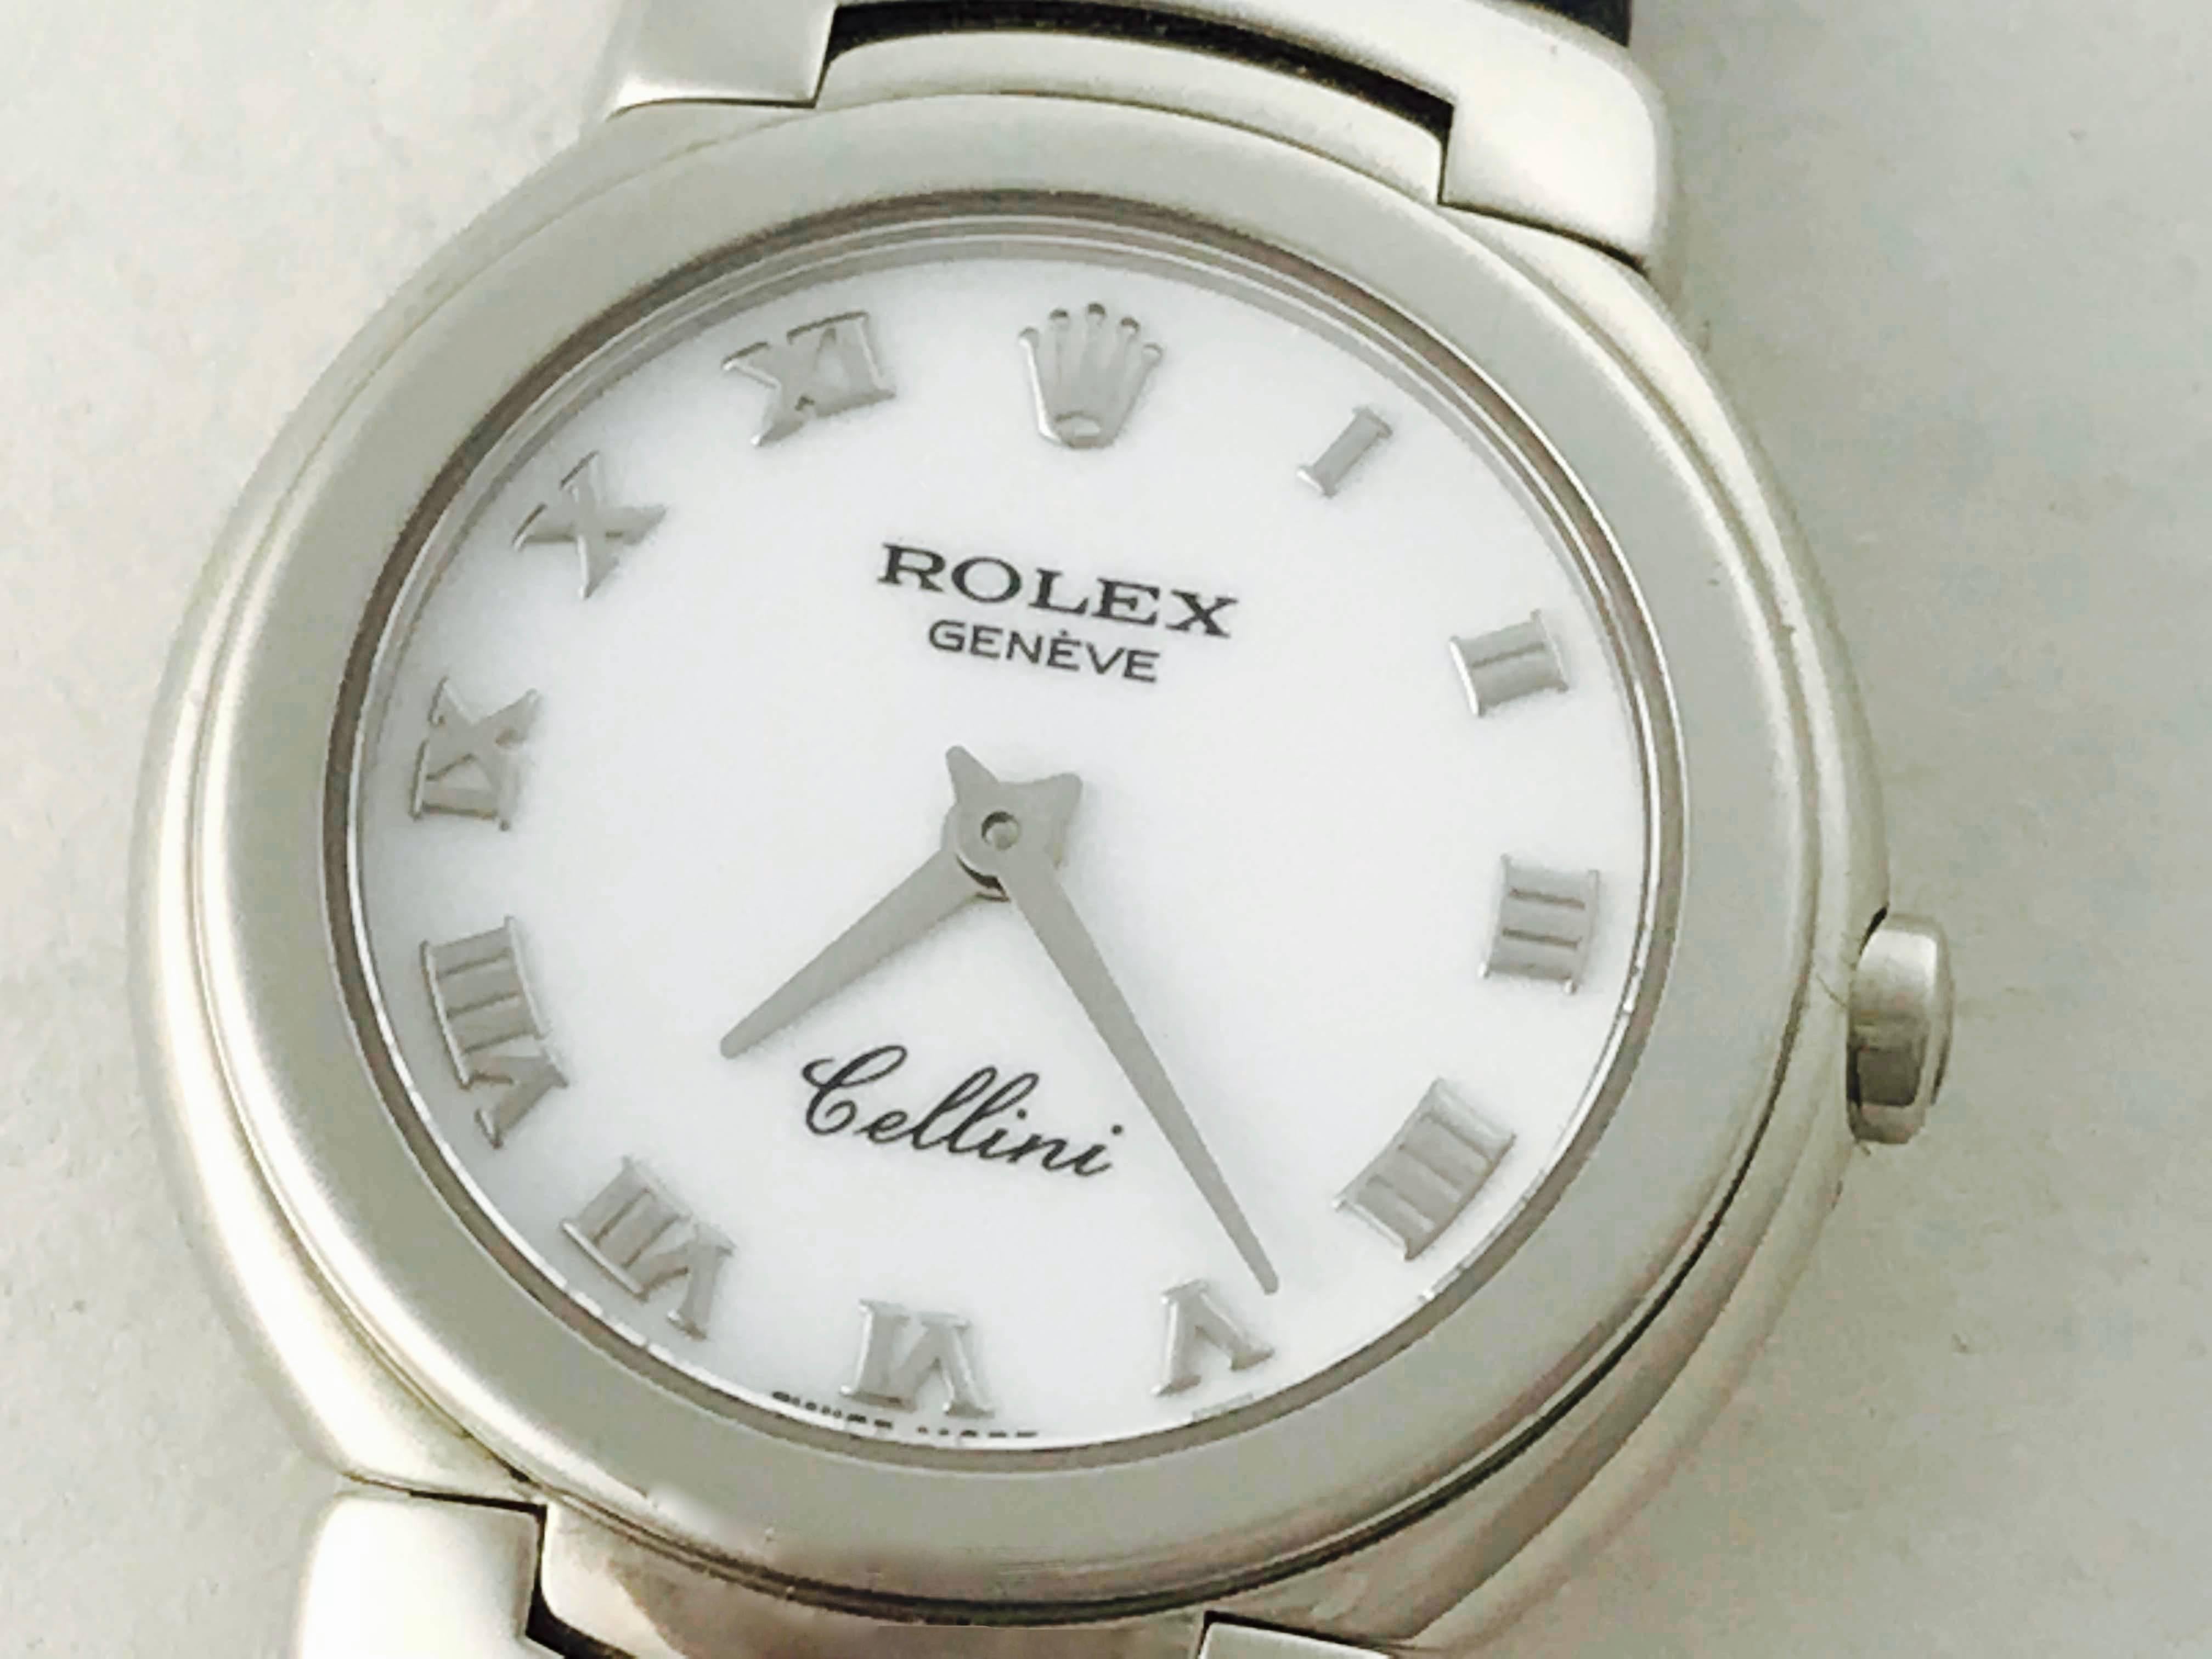 Rolex Cellini Model 6621/9 ladies Pre Owned Quartz wrist watch.
White Dial with polished Roman numerals. 18k White Gold round style case (25mm). Black strap with 18k White Gold Rolex deployant clasp. Rolex box, papers and booklet included. Inventory